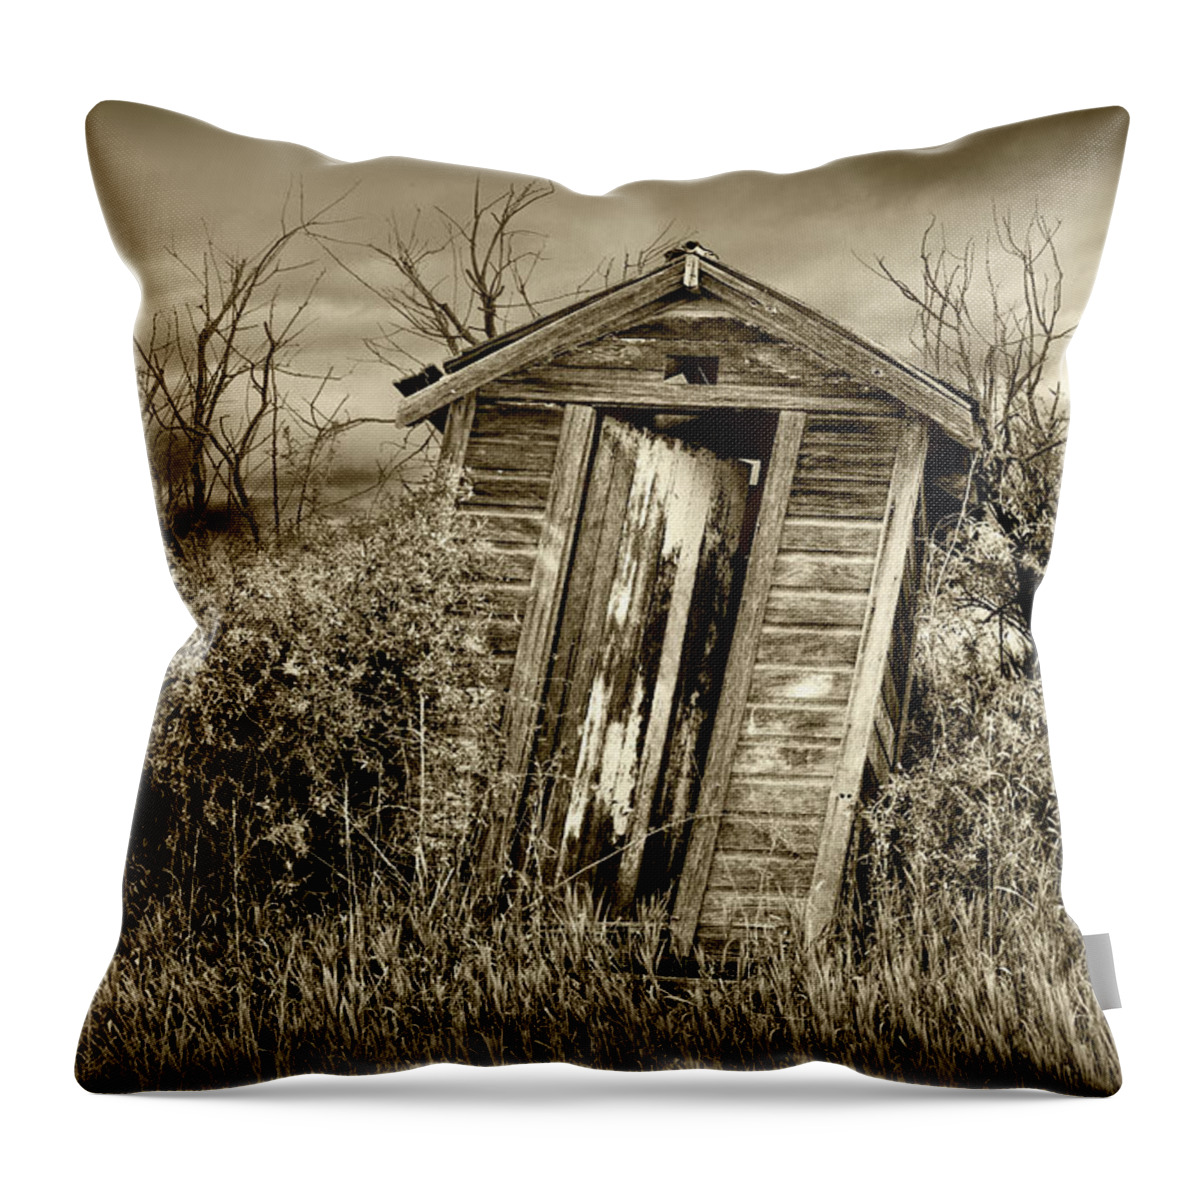 Outhouse Throw Pillow featuring the photograph When Nature Calls in Sepia Tone by Randall Nyhof